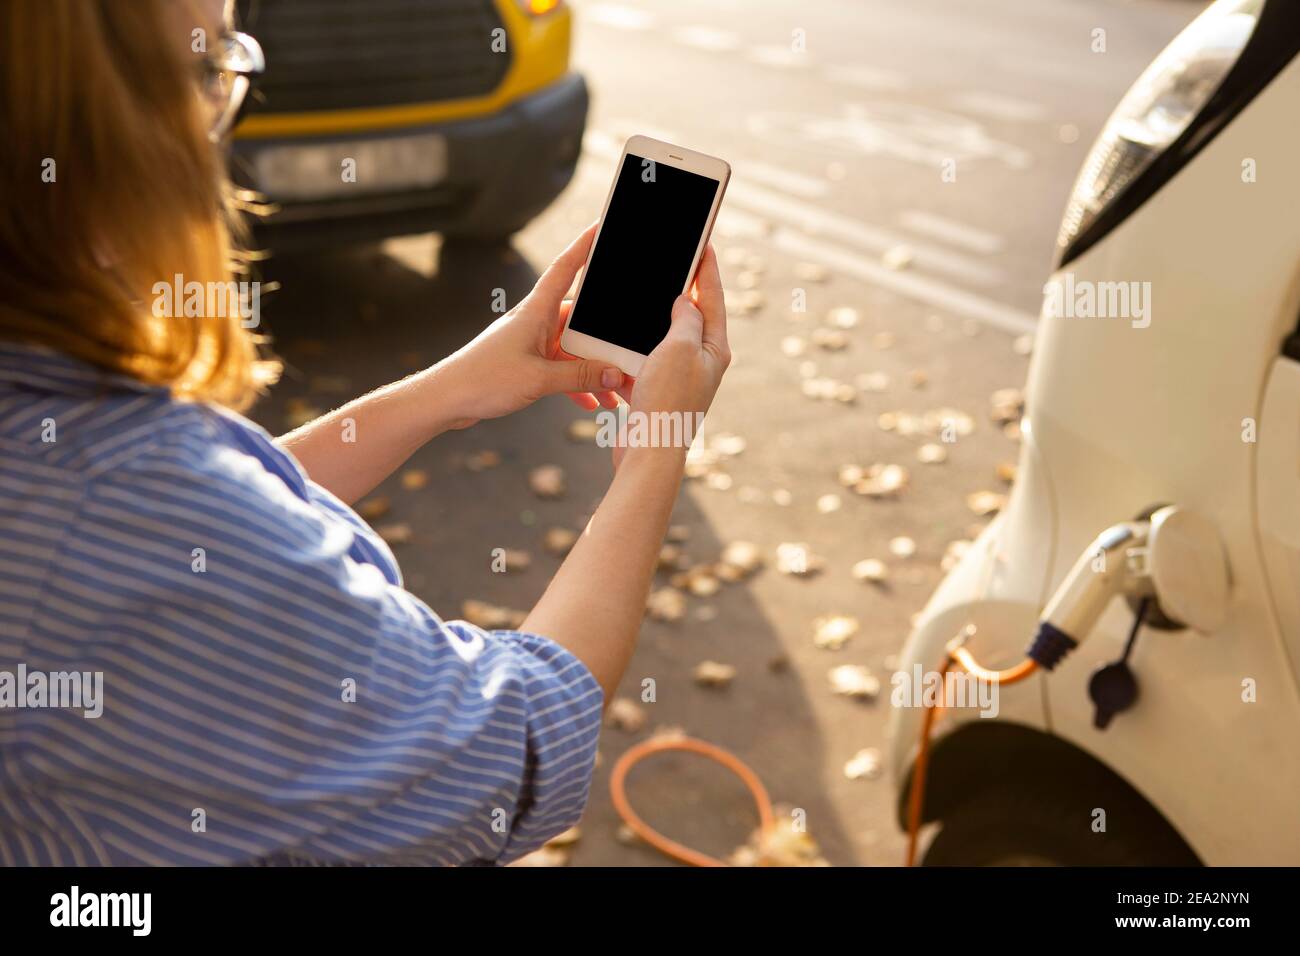 Hands with smartphone on a background of rental car at the charging station for electric vehicles. Car sharing.  Stock Photo